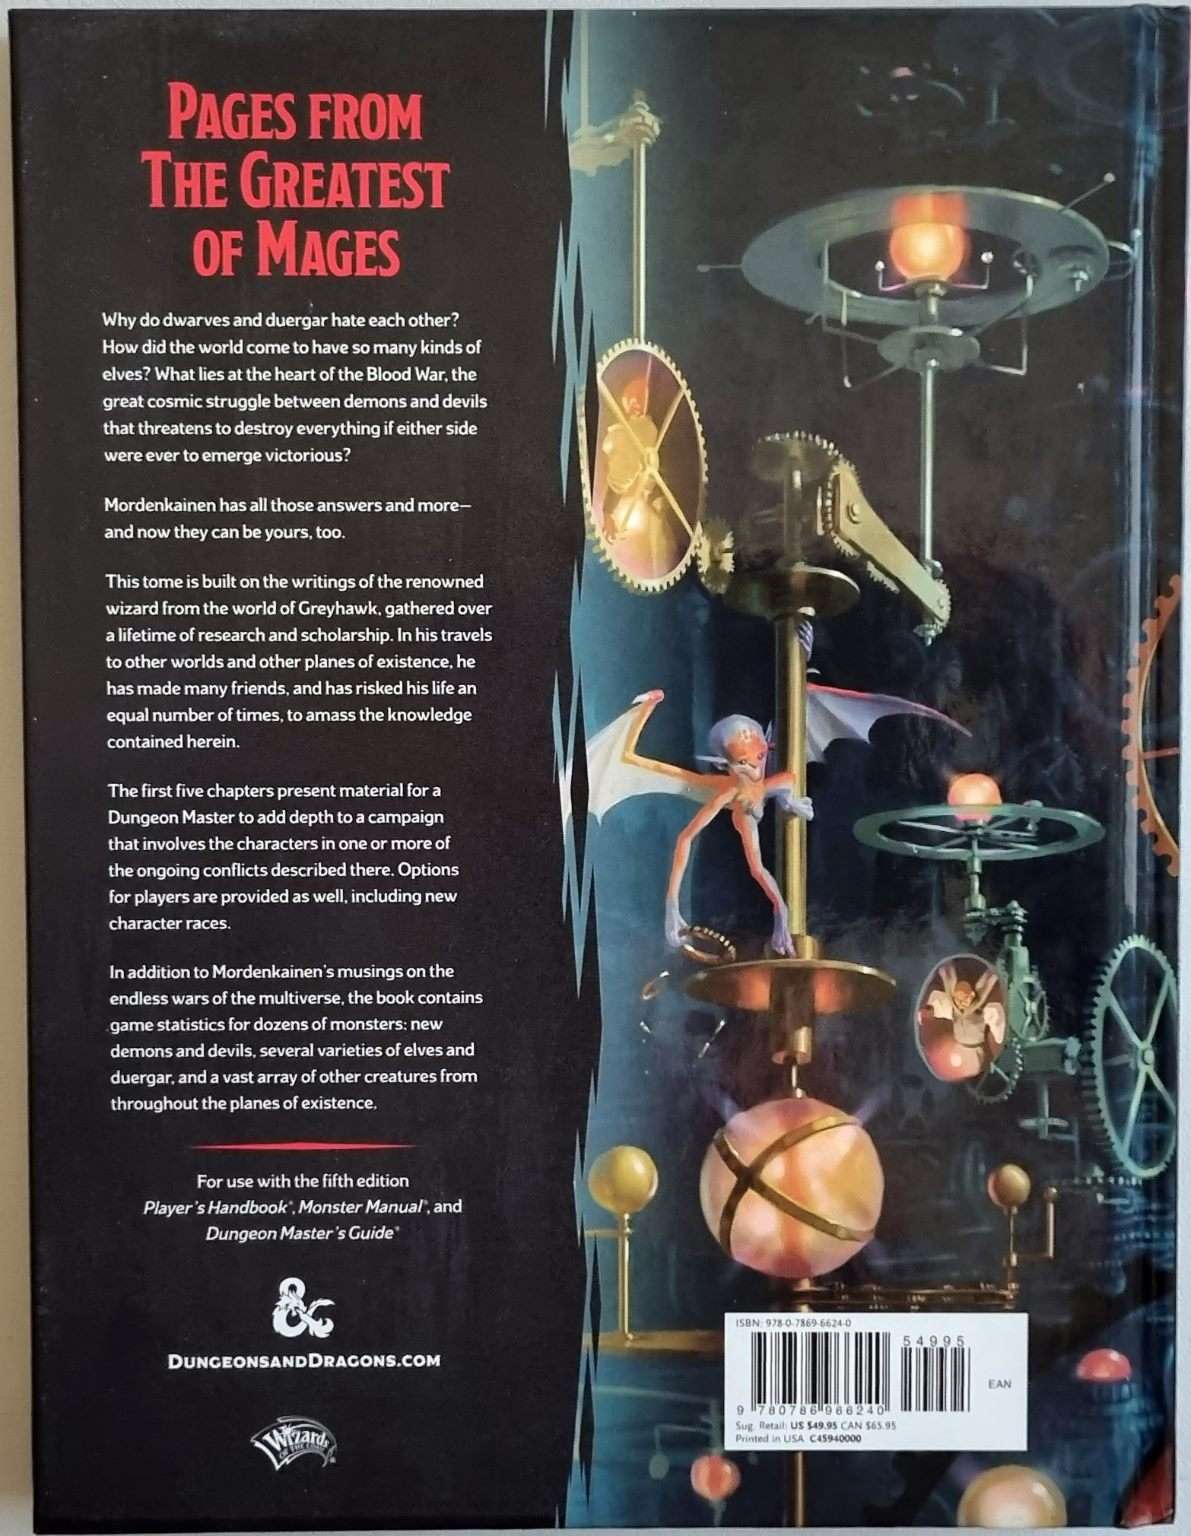 Dungeons and Dragons - Mordenkainen's Tome of Foes 5e